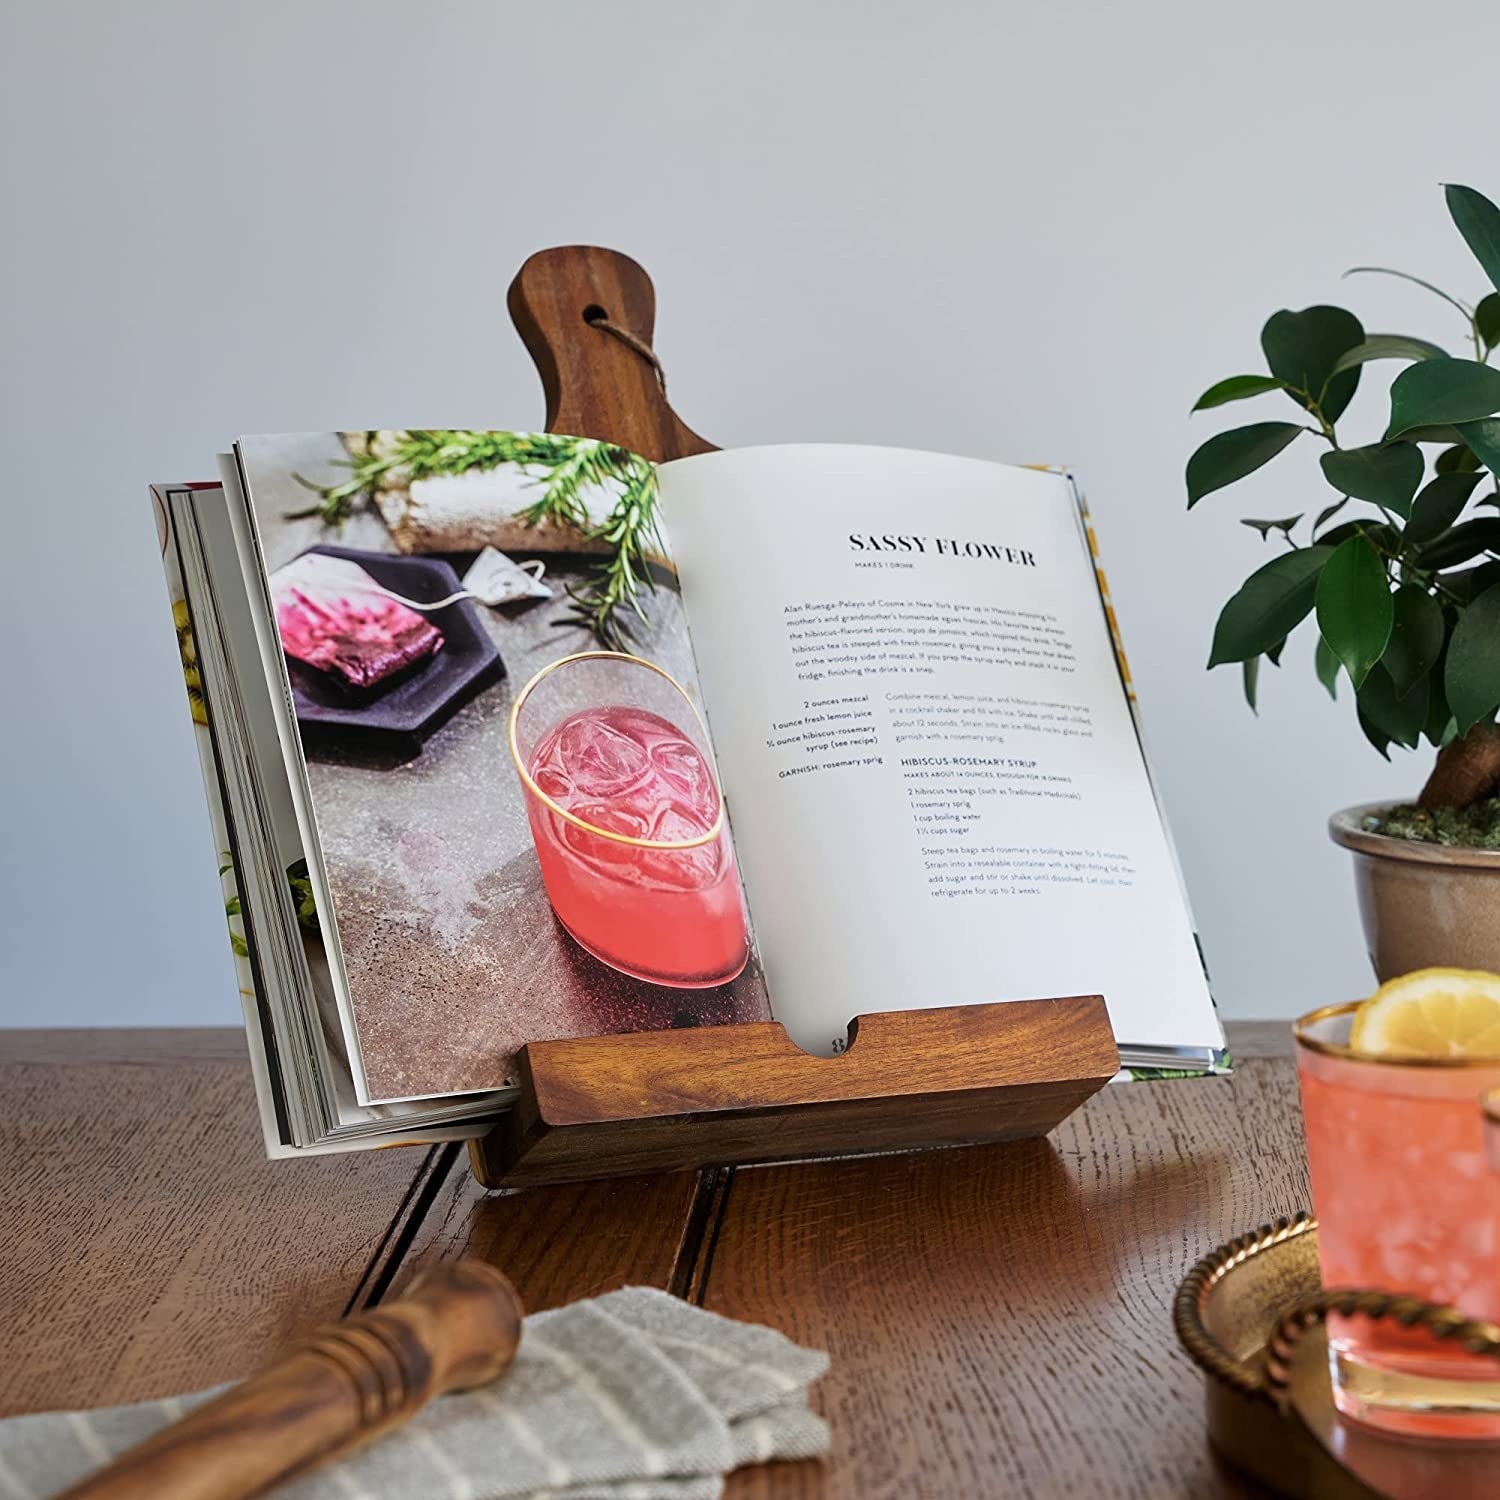 A cookbook on the book holder showing a recipe for a cocktail